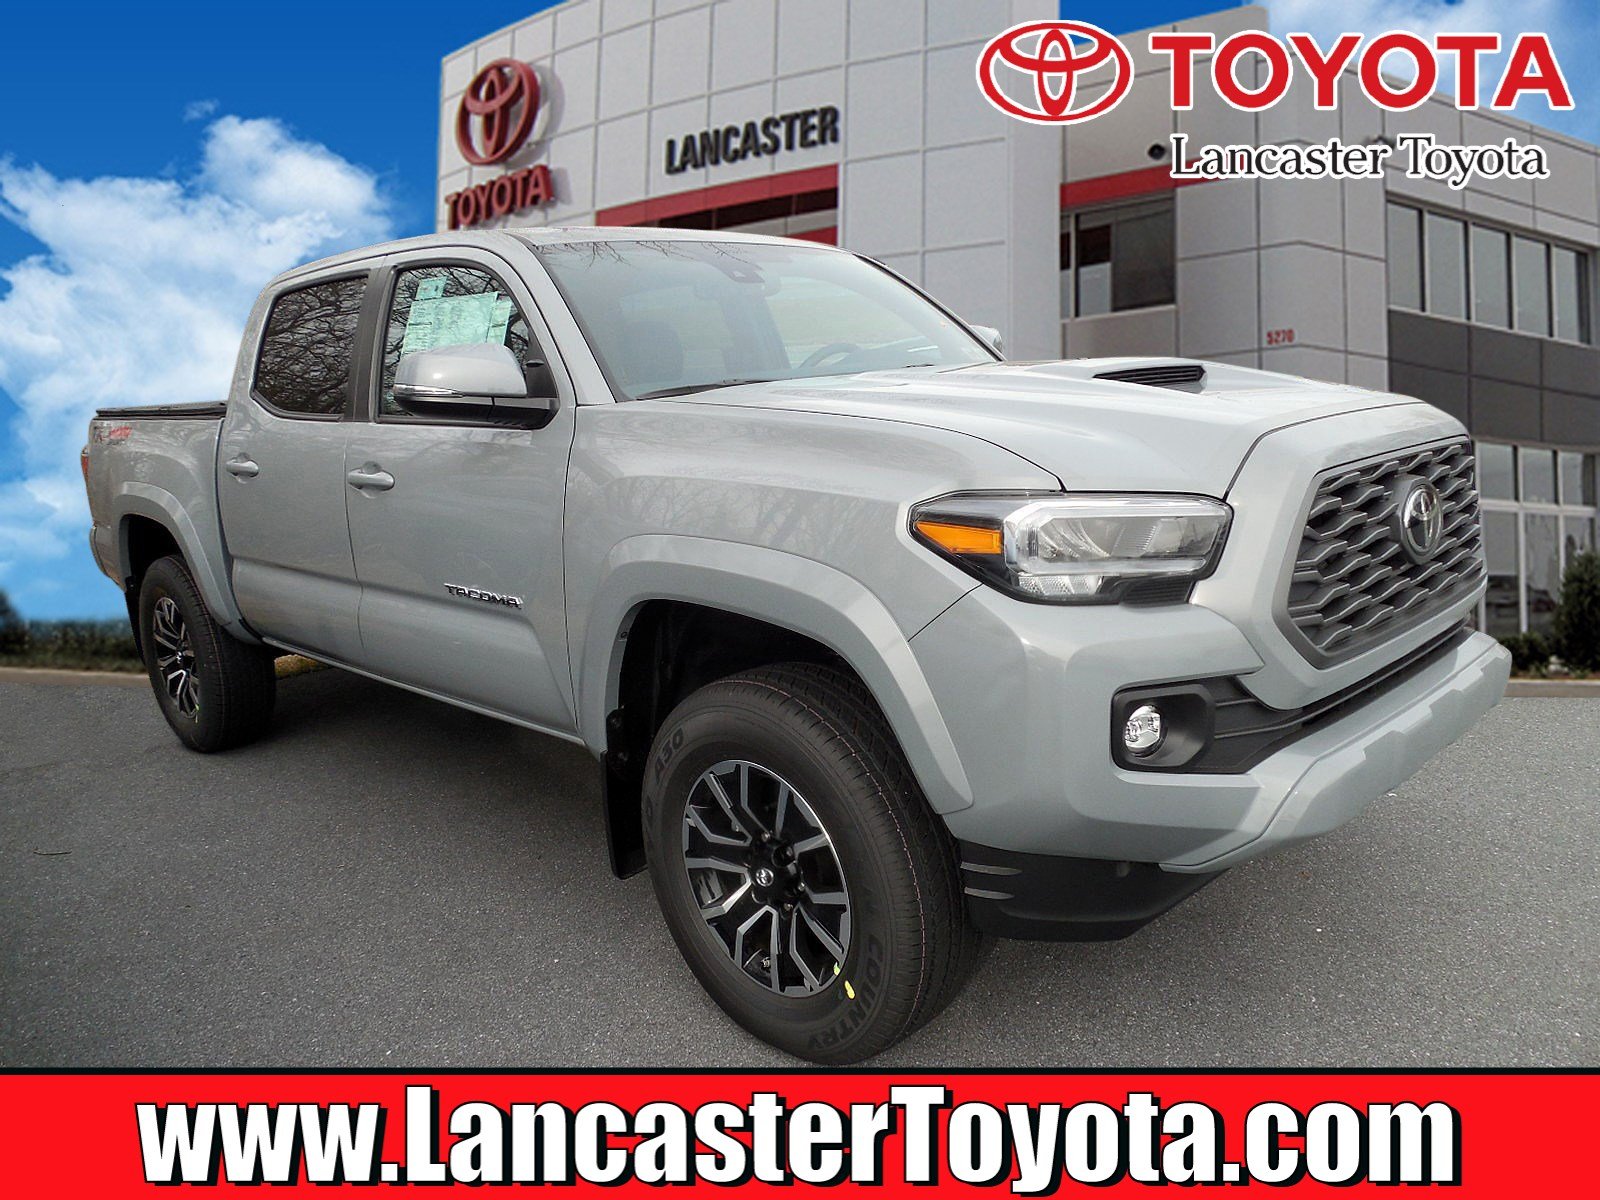 New 2020 Toyota Tacoma Trd Sport Double Cab In East Petersburg 14670 Lancaster Toyota